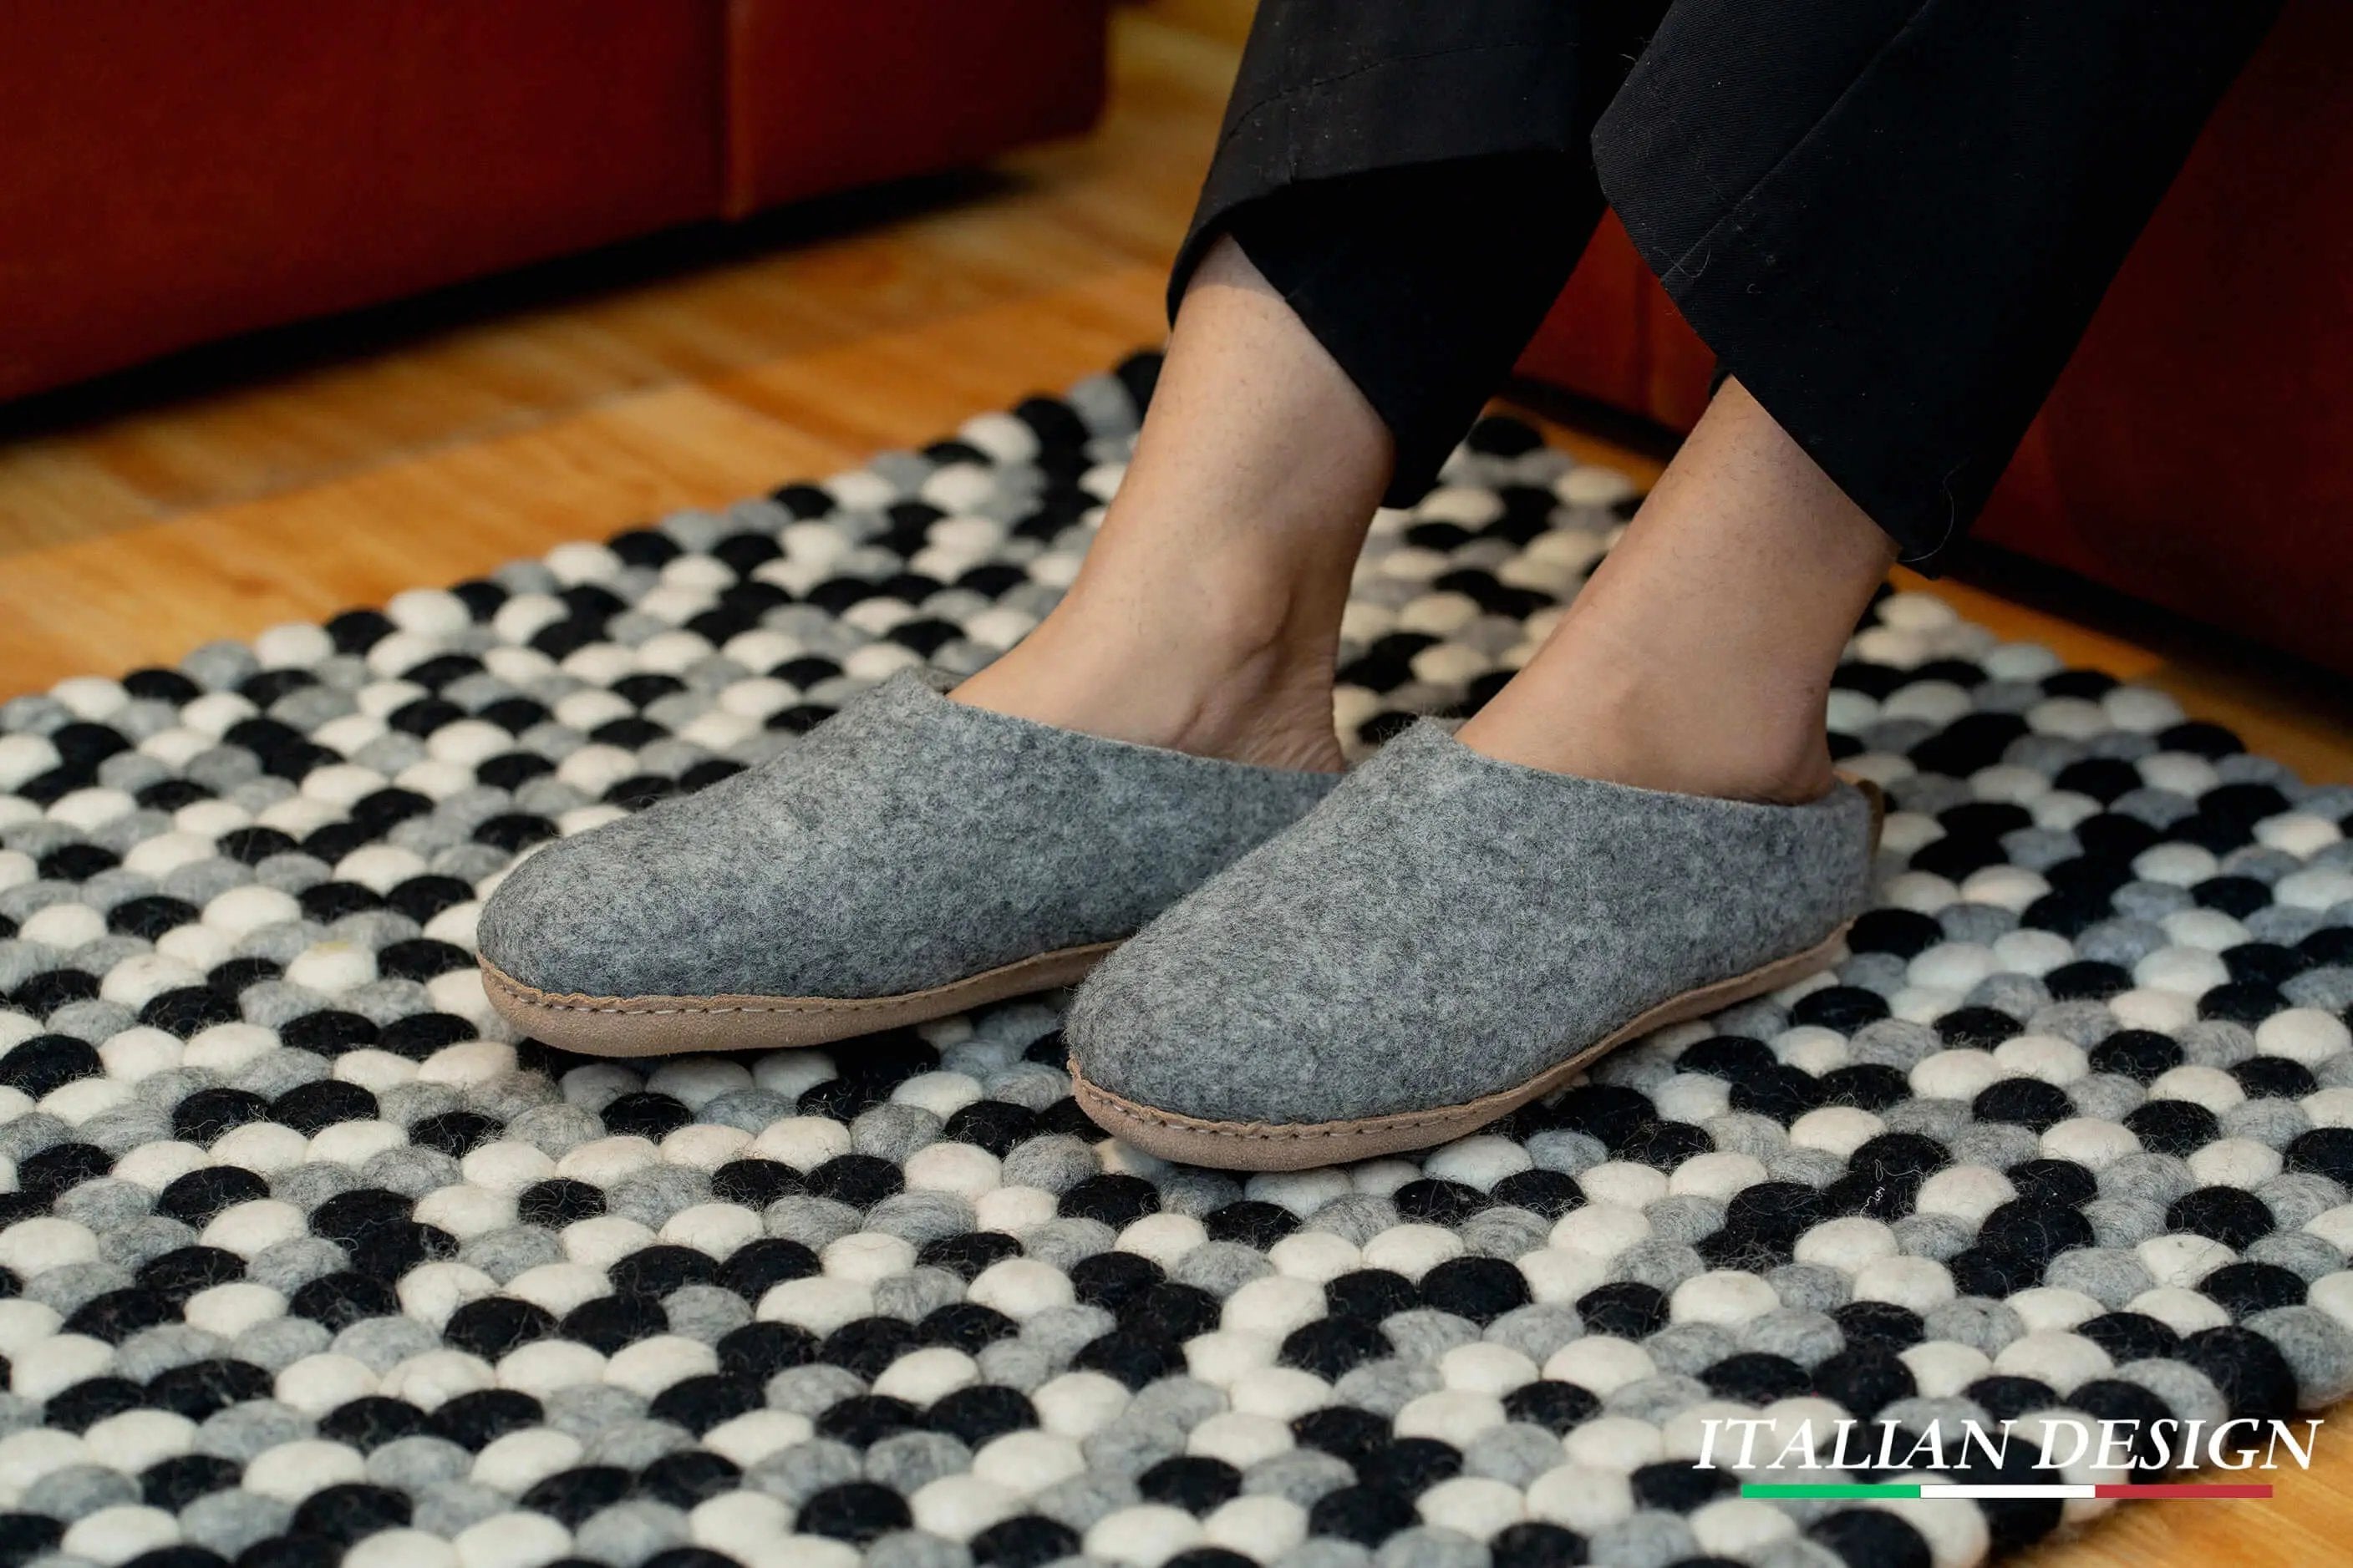 Indoor Open Heel Slippers With Leather Sole - Natural Grey